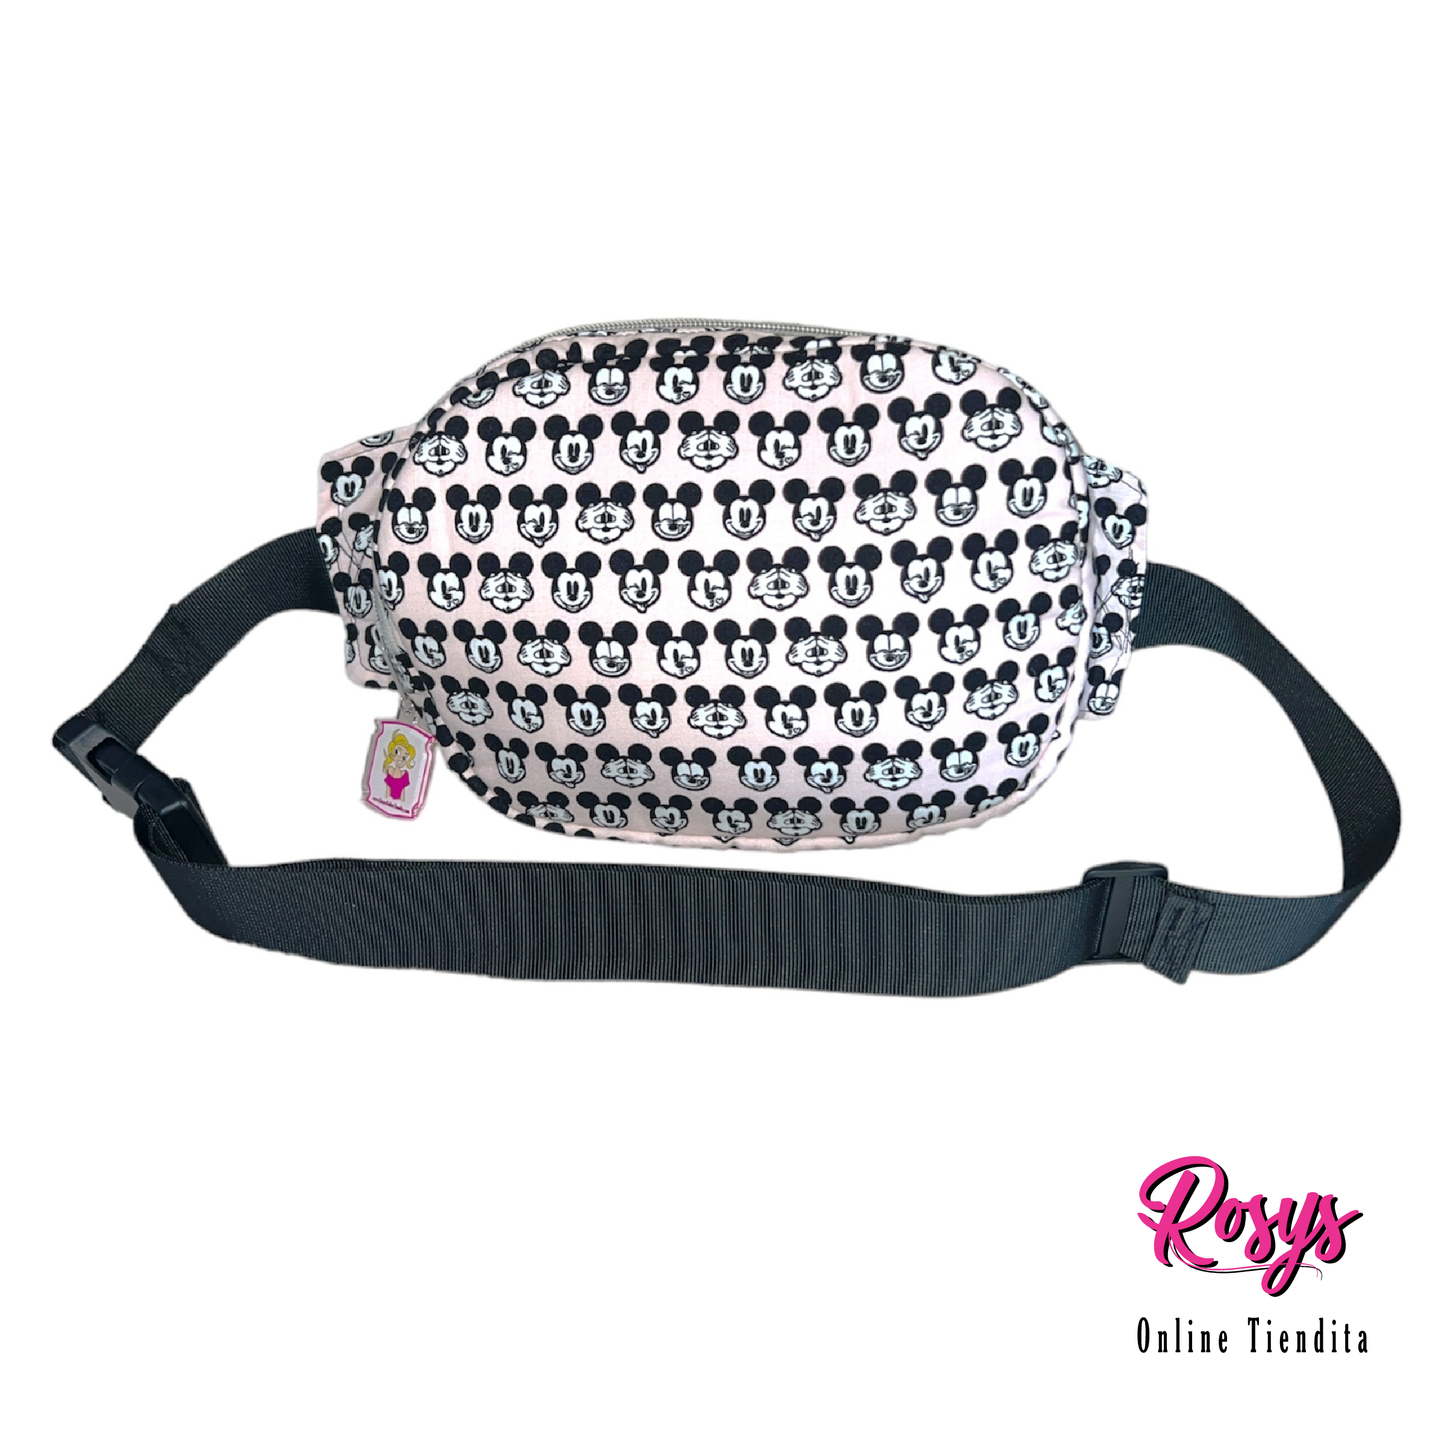 Peek A Boo Mouse Fanny Pack | Handmade Belt Bag | Made By Rosy!